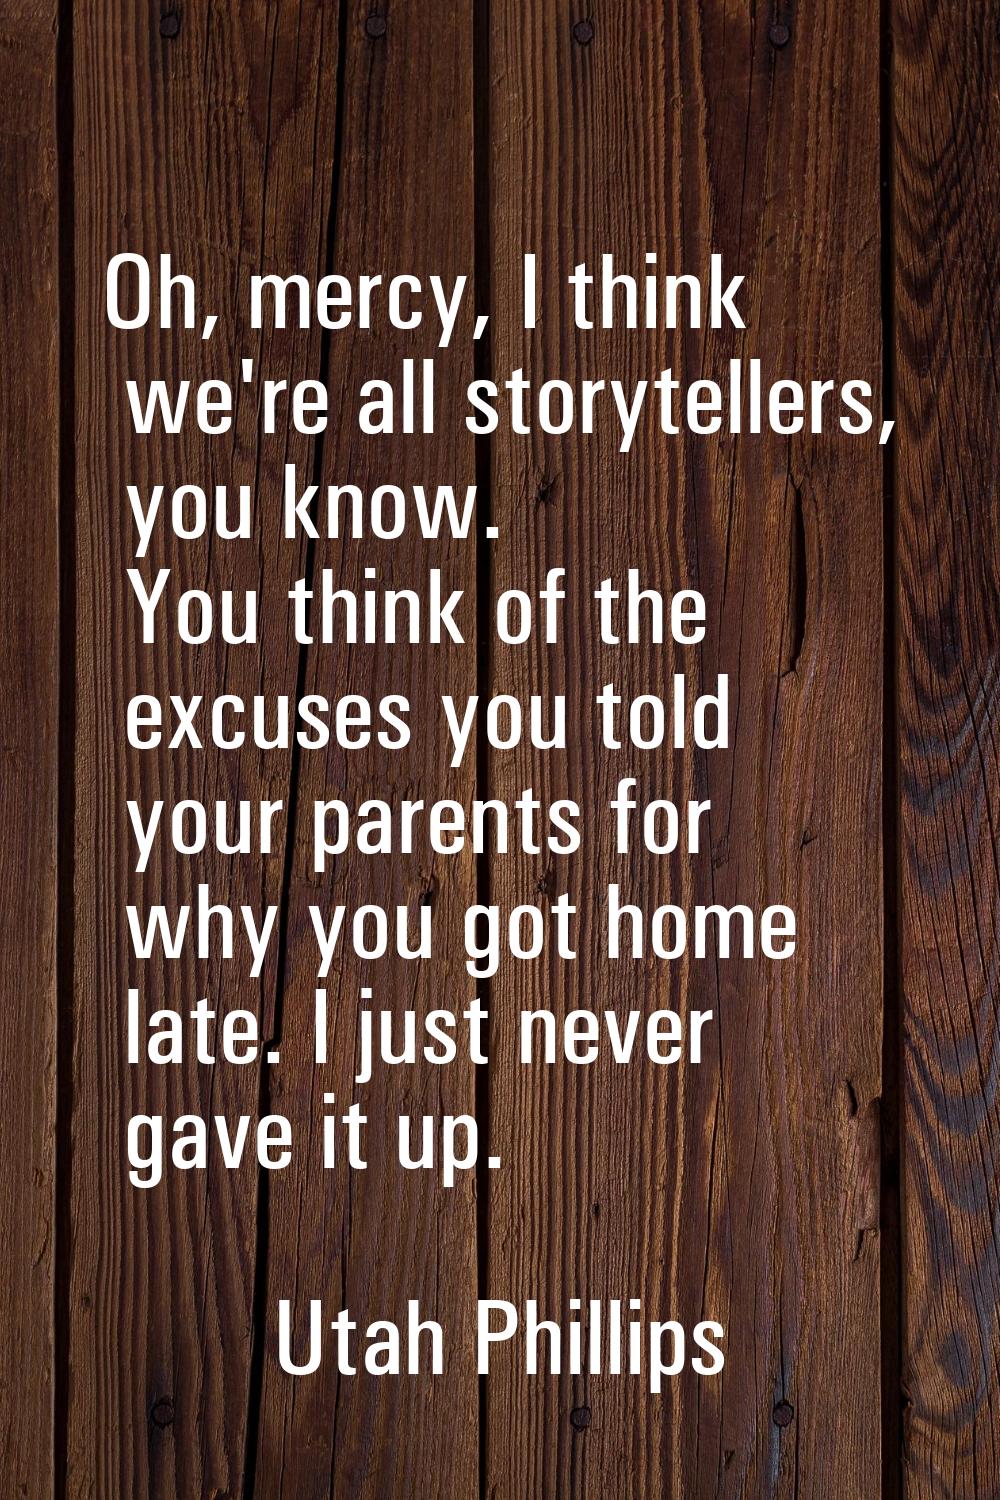 Oh, mercy, I think we're all storytellers, you know. You think of the excuses you told your parents